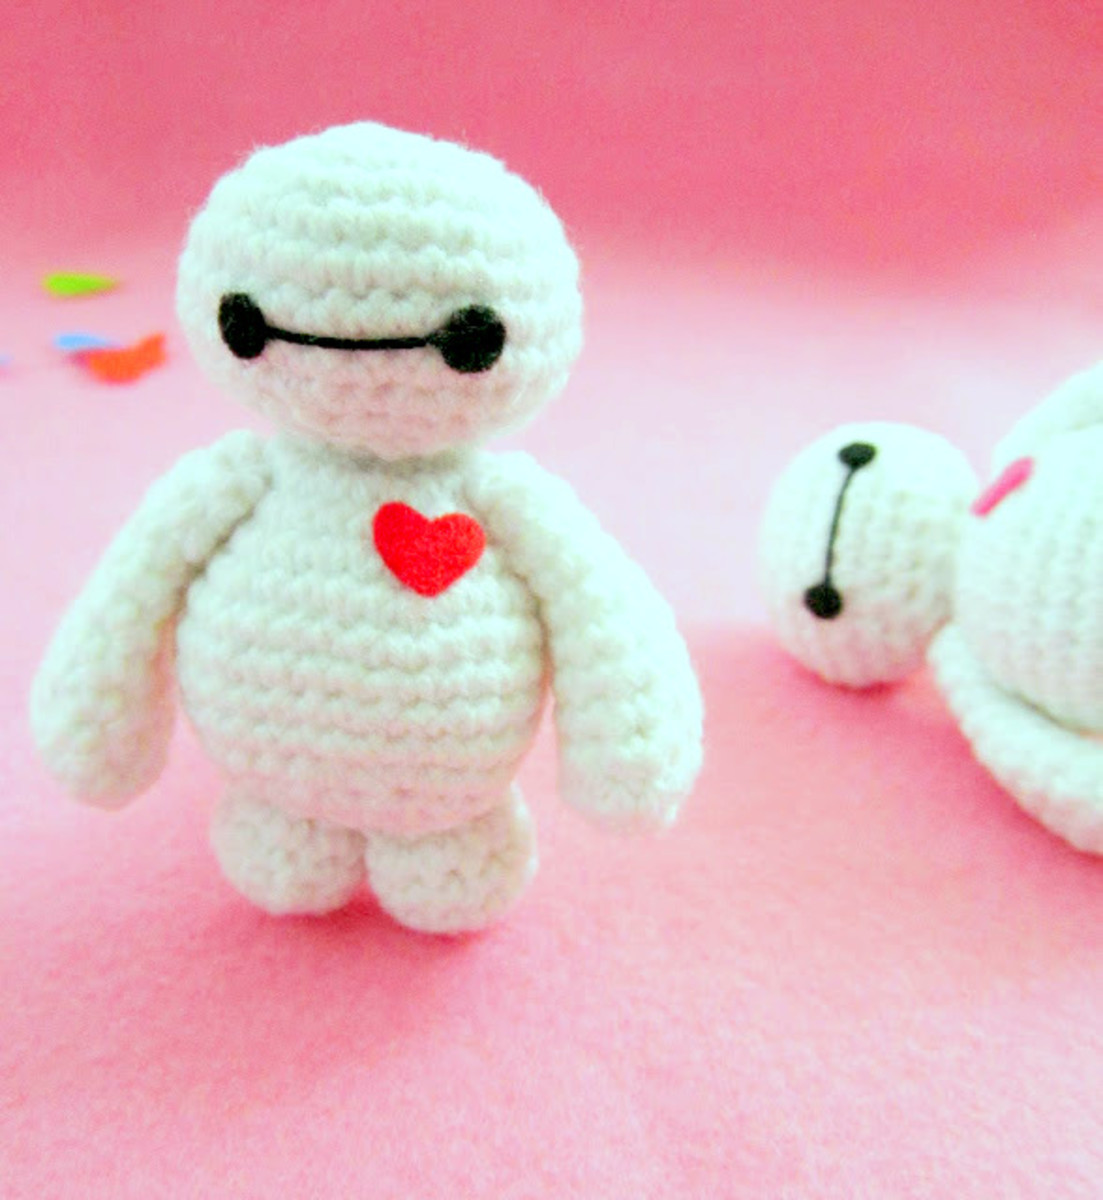 Just when you thought Baymax couldn't get any cuter.